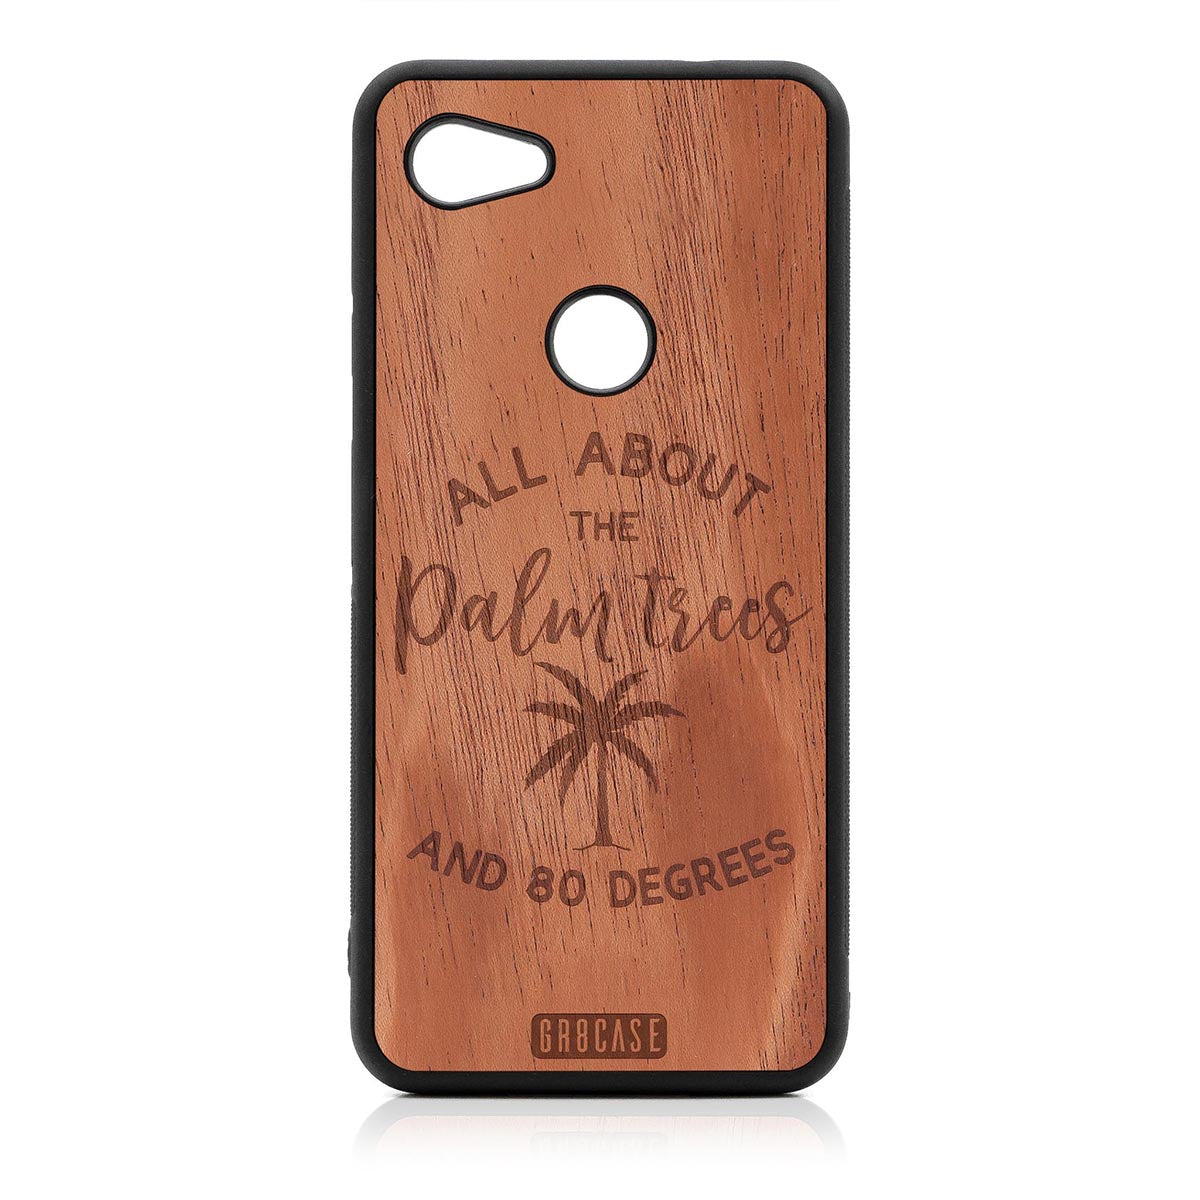 All About The Palm Trees and 80 Degrees Design Wood Case For Google Pixel 3A by GR8CASE